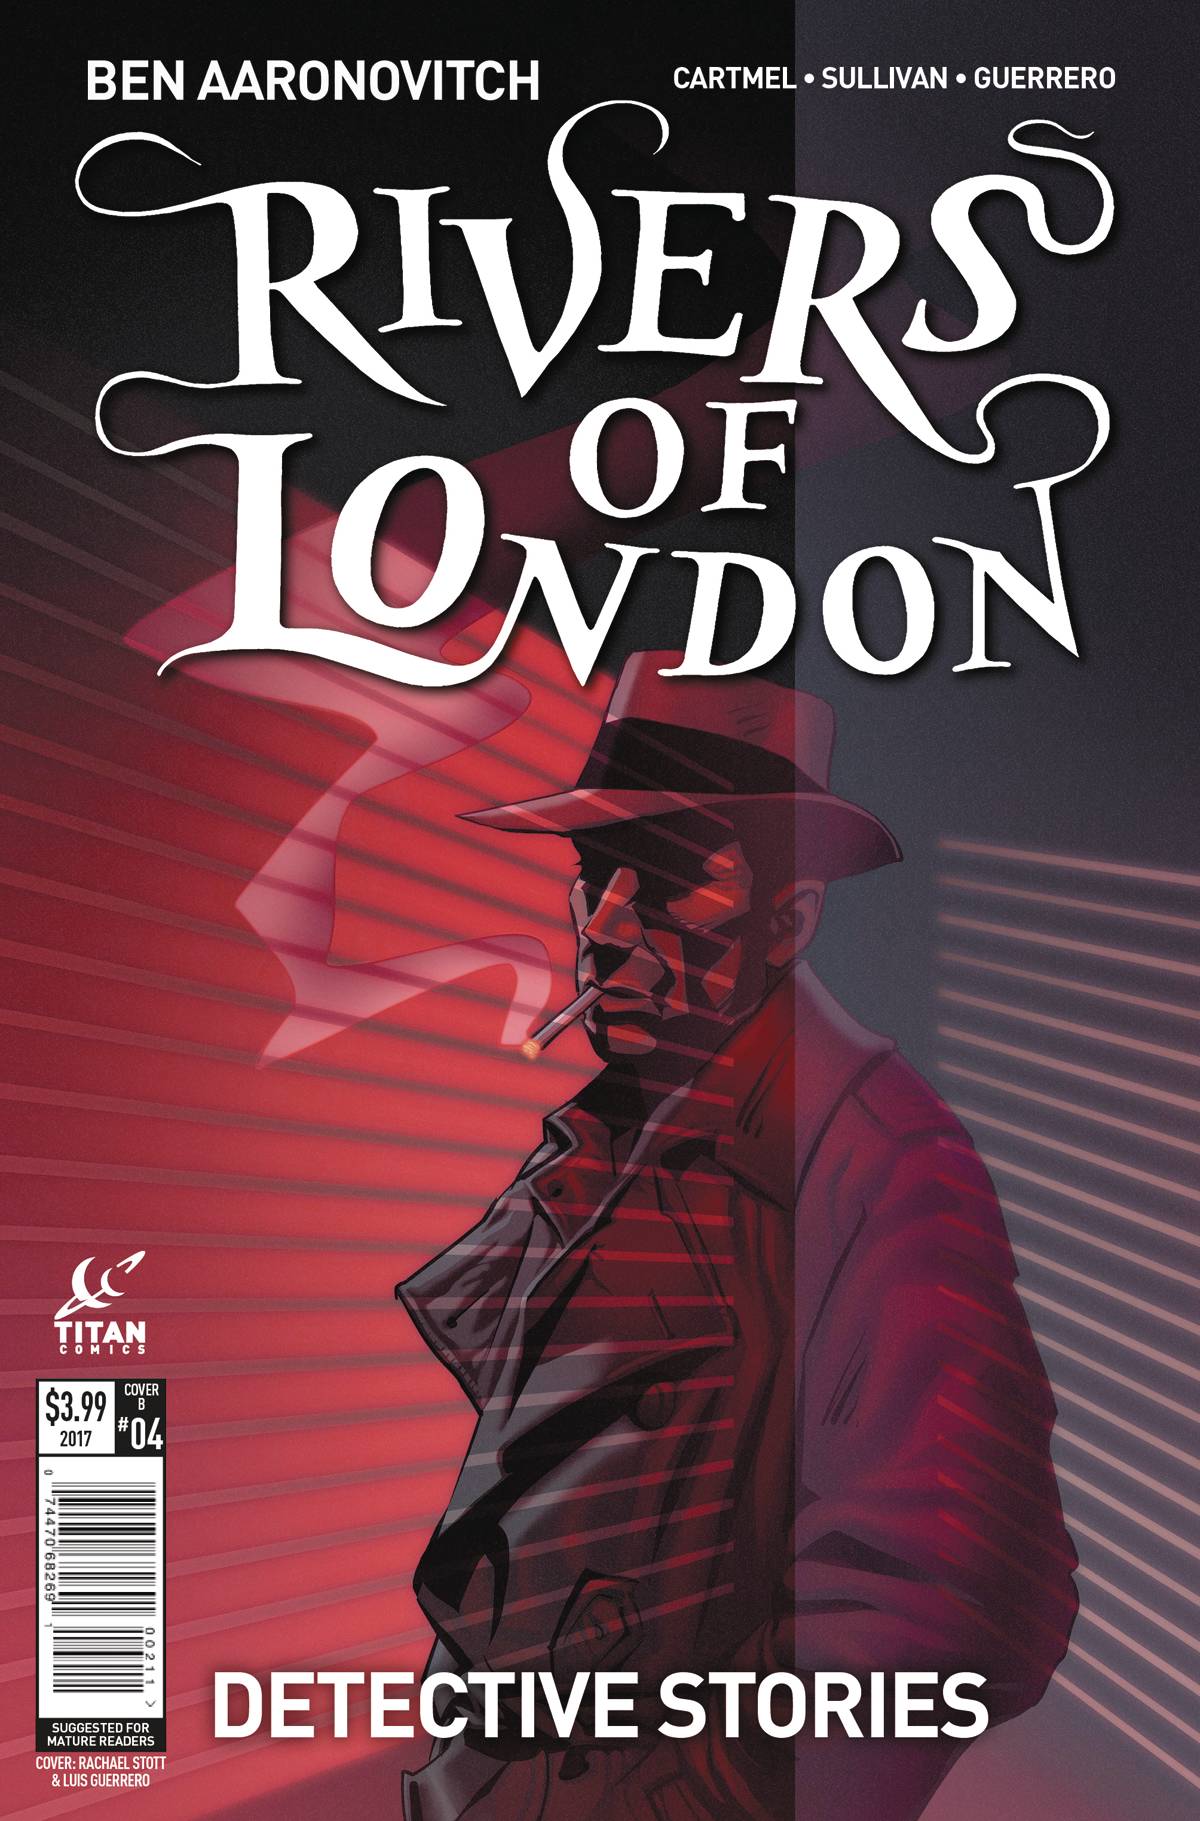 RIVERS OF LONDON: DETECTIVE STORIES#3